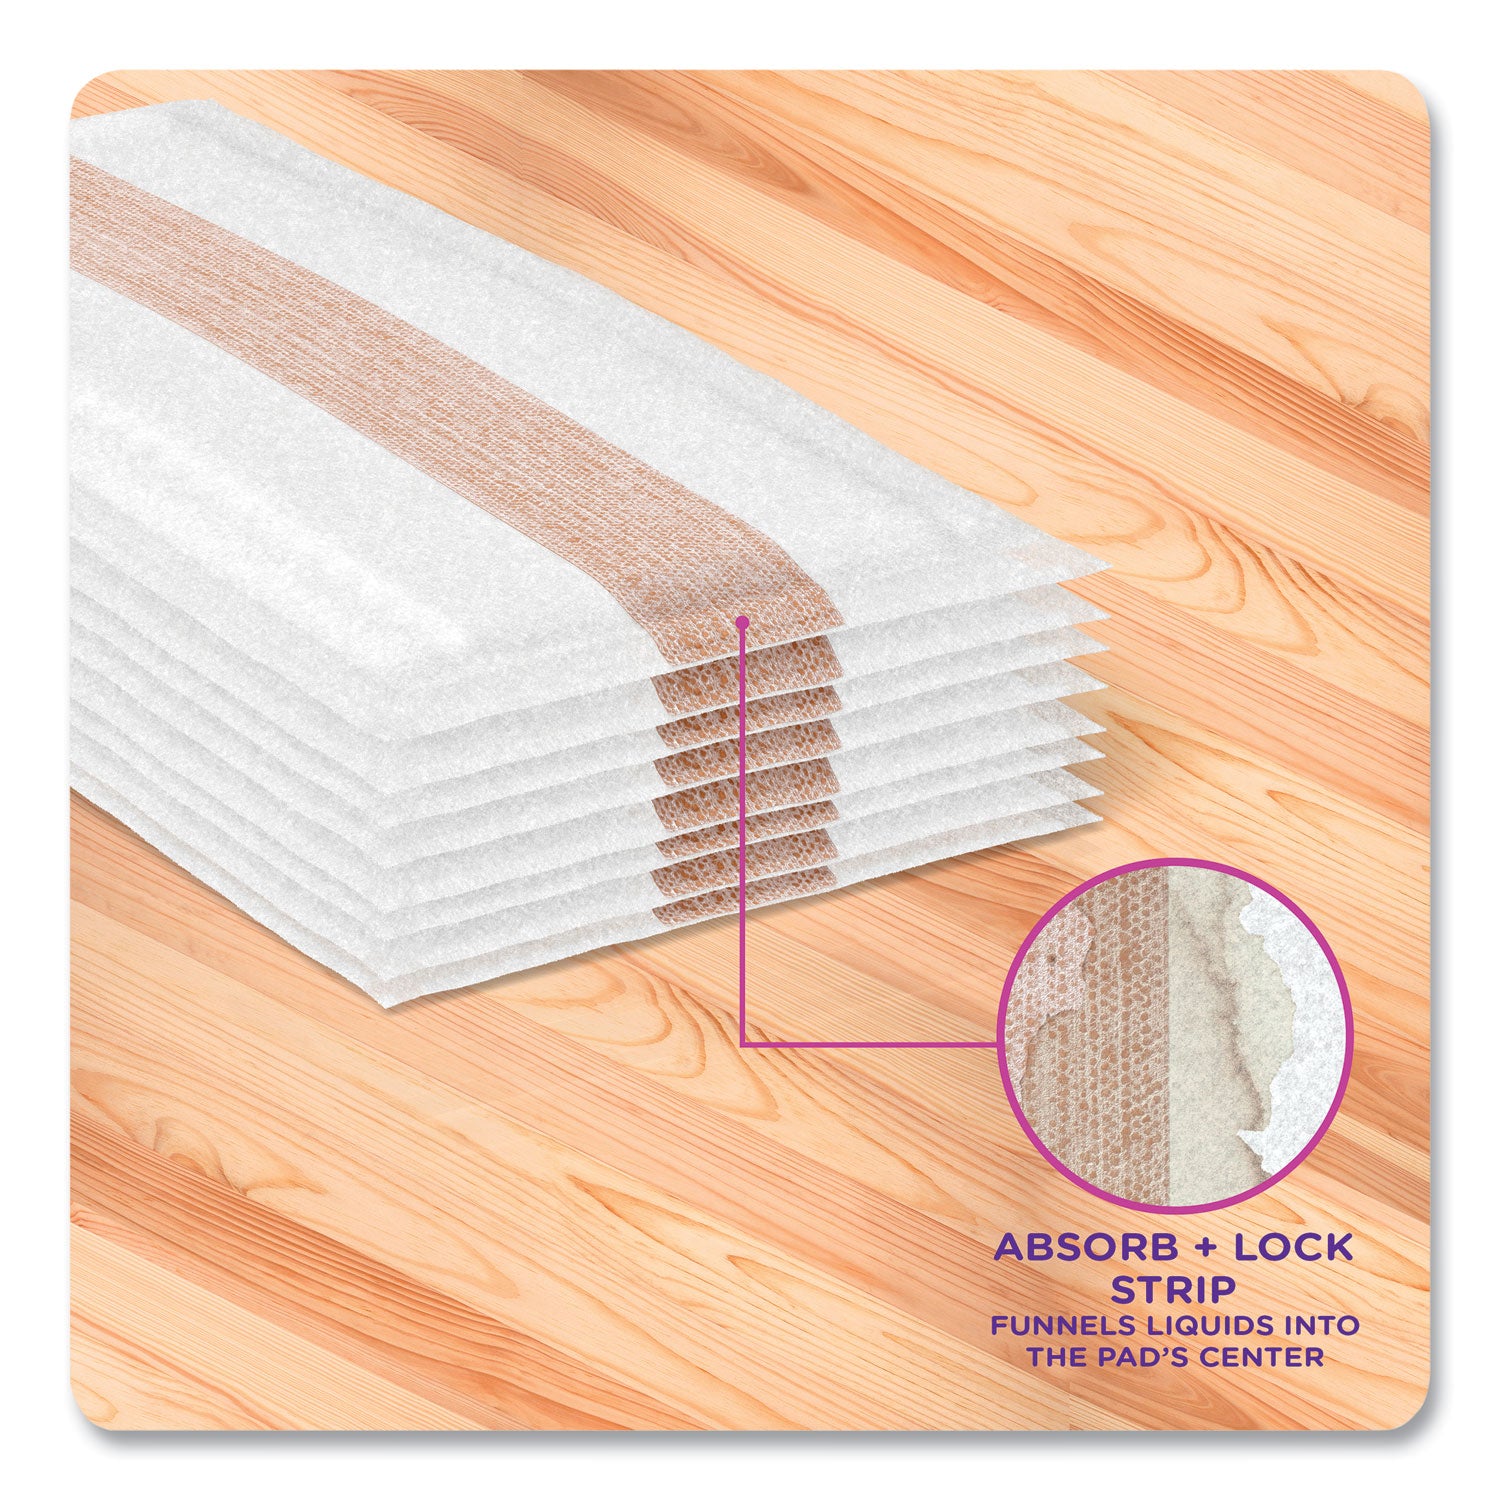 wetjet-system-wood-mopping-pad-54-x-113-white-20-pack_pgc76563 - 7